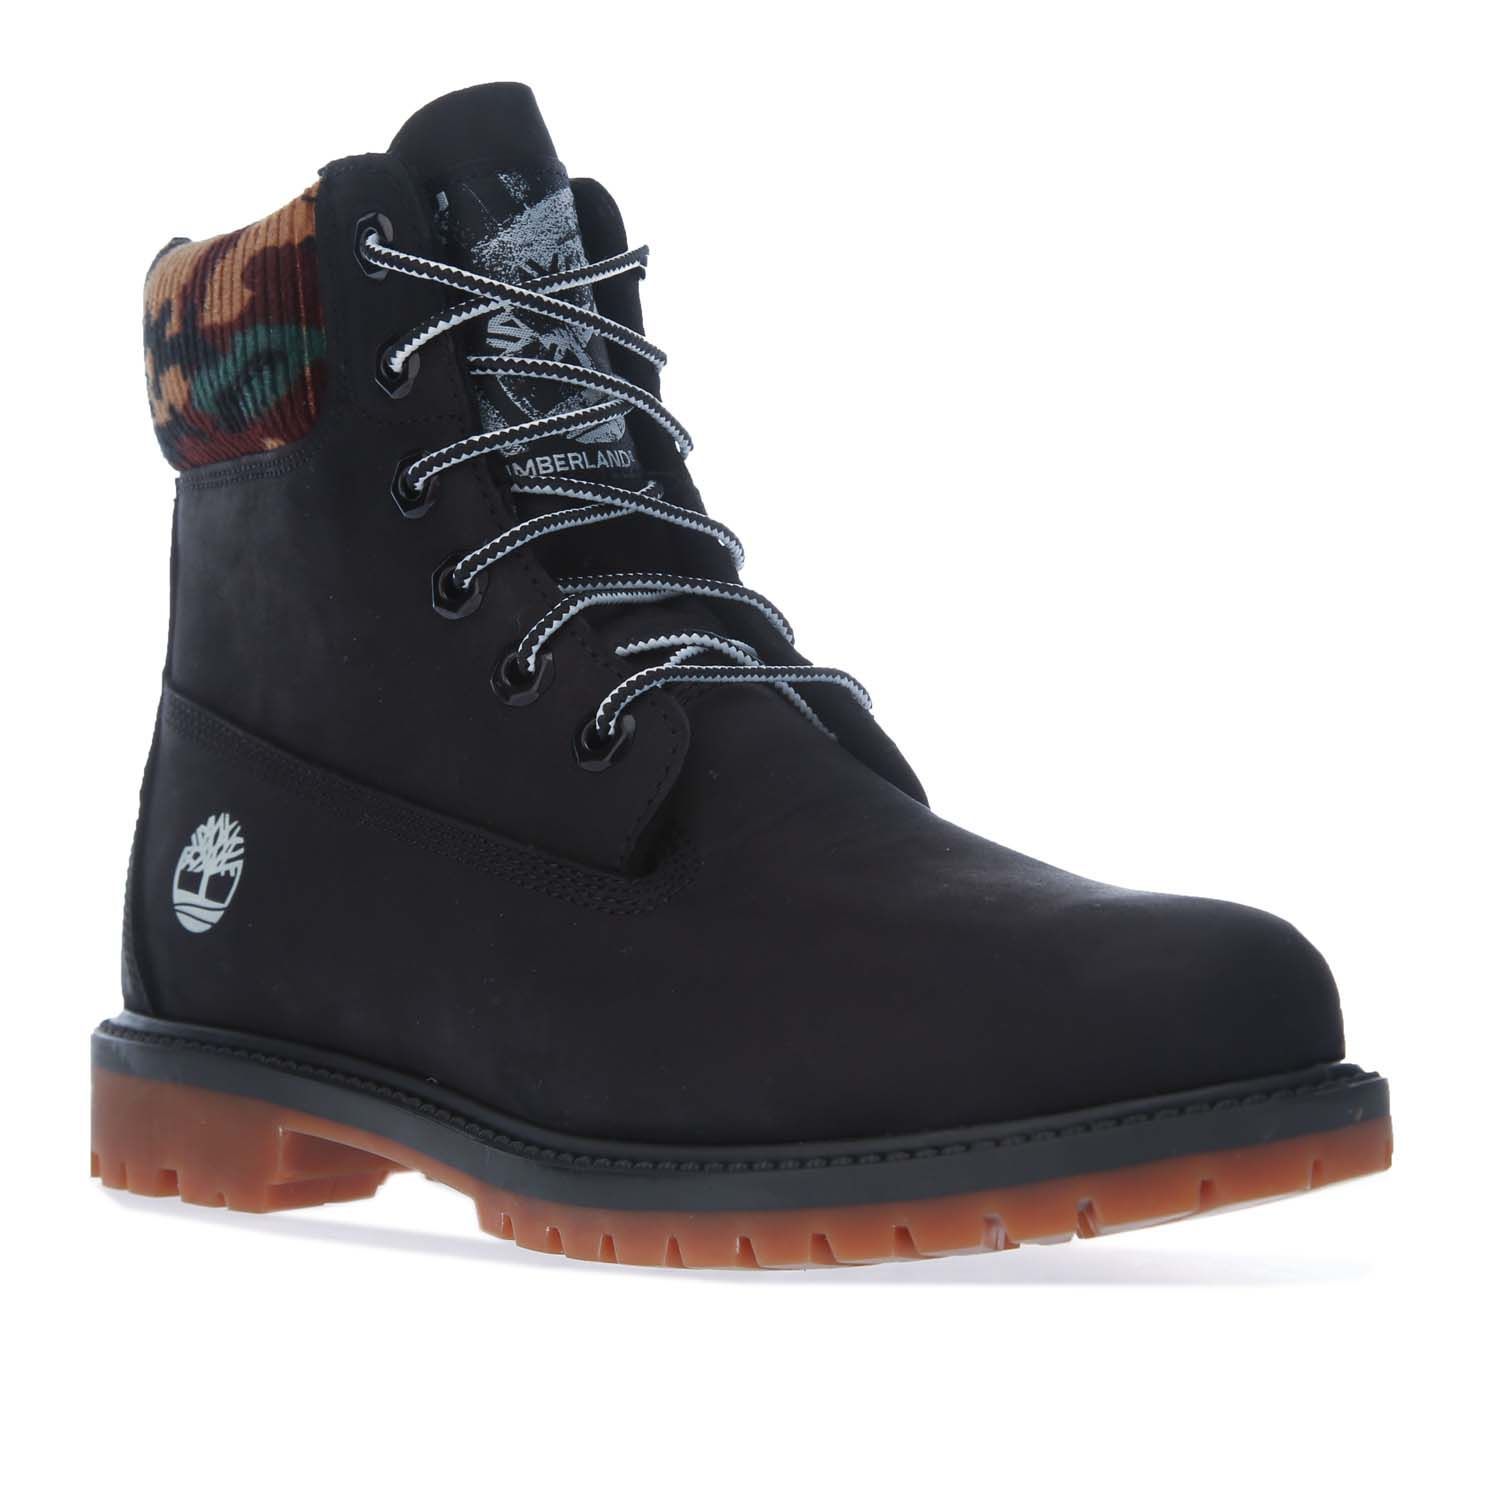 Womens Timberland 6 Inch Heritage Cupsole Boots in black.- Nubuck leather upper.- Lace up style.- Seam-sealed waterproof construction.- Contrast padded cuff.- Round toe.- Anti-fatigue footbed.- EVA midsole for lightweight cushioning.- Lugged tread.- Durable rubber outsole.- Leather upper  Leather lining  Synthetic sole.- Ref: CA2M7T